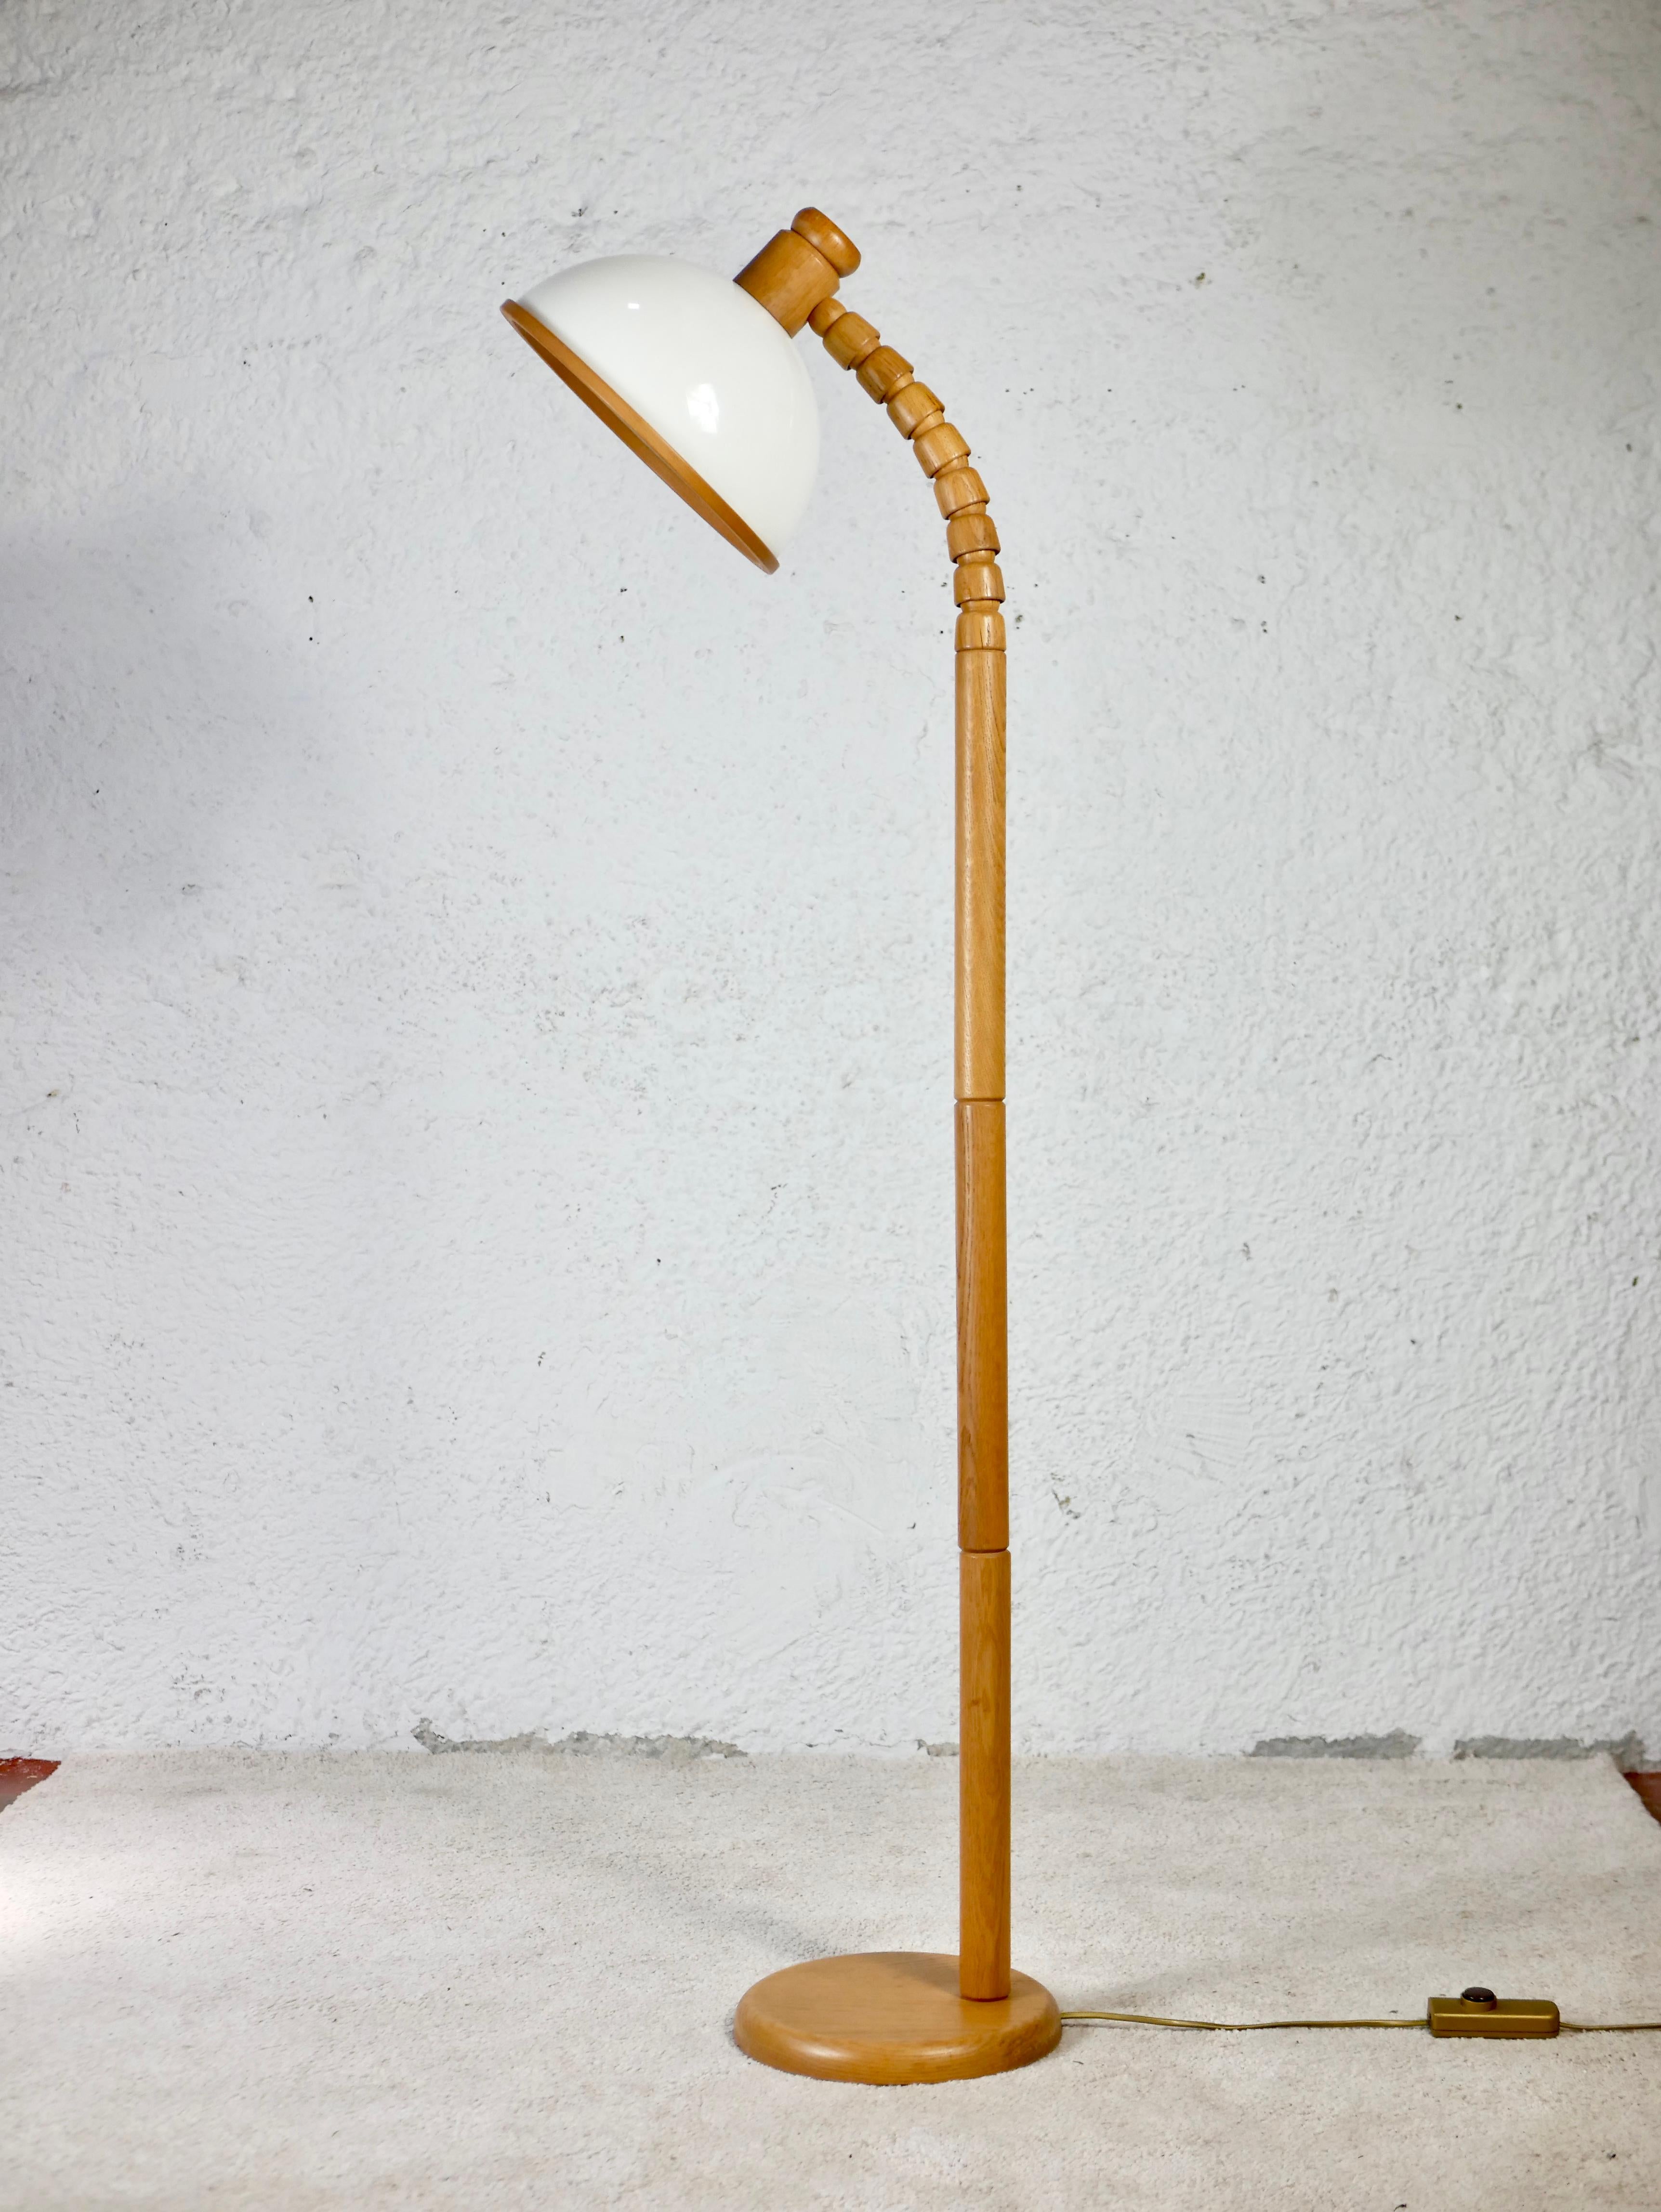 Nice and cute floor lamp designed and produced by Solbackens Svarveri, made in Sweden, in the 1970s.
Rare to find oak version (usually pine), adjustable, with its original white plastic lampshade.
Very good condition, can be installed in all